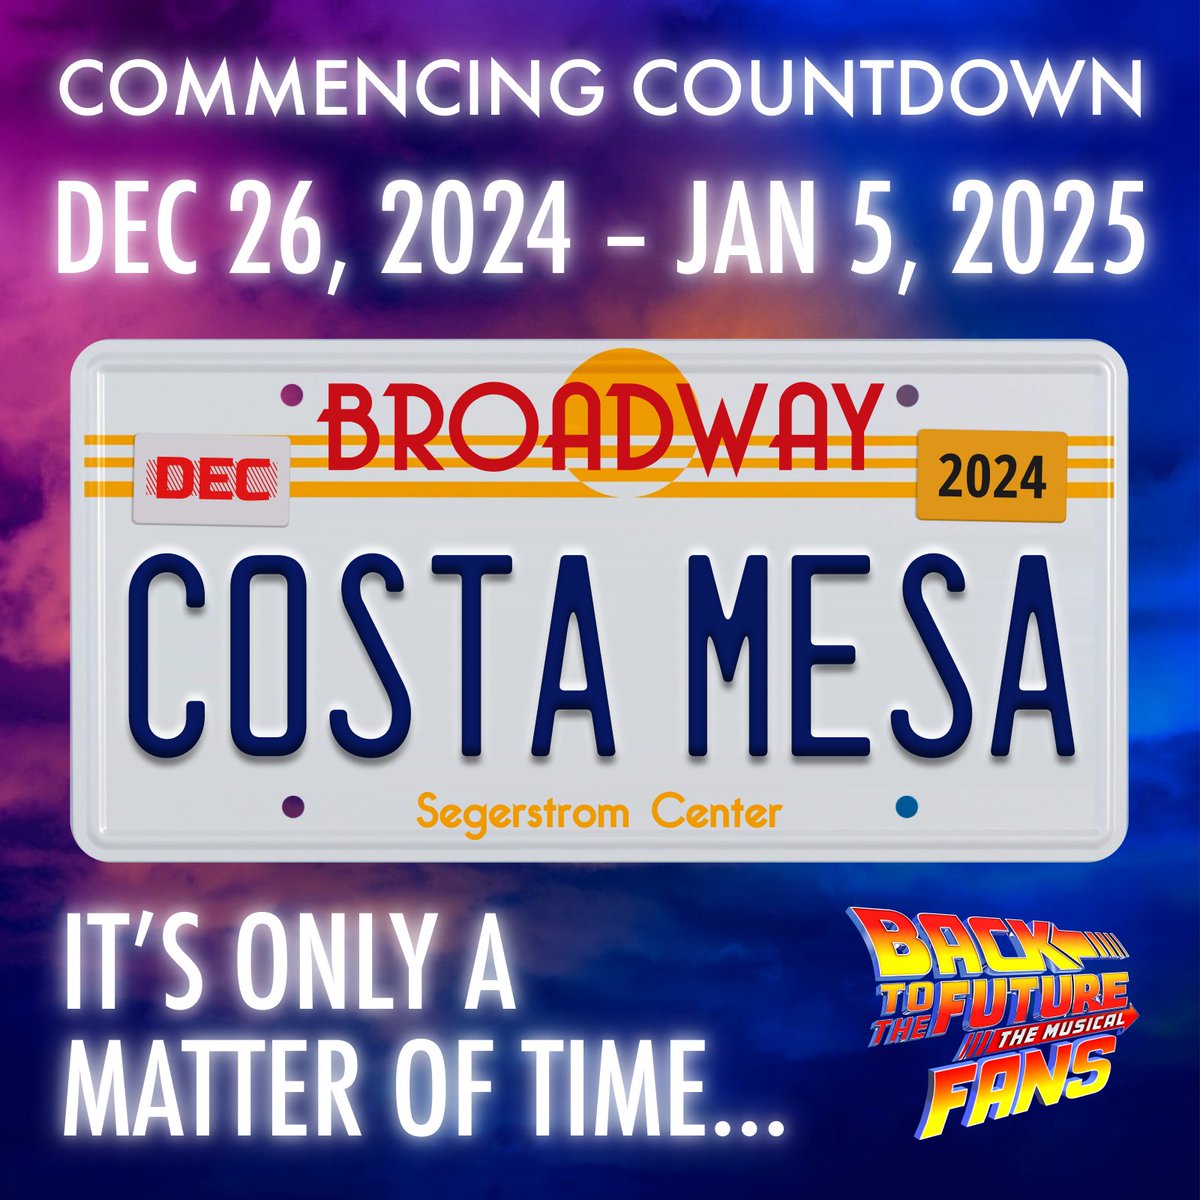 HEY YOU… GET YOUR DAMN HANDS OFF HER! 🫵

The 24/25 #Broadway Season at @SegerstromArts includes @BTTFBway from December 26th, 2024 to January 5th, 2025 at the Segerstrom Hall, #CostaMesa, #California ⚡️

🎼 It’s only a matter of time… 💙

#bttfbway #bttfbroadway #bttftour